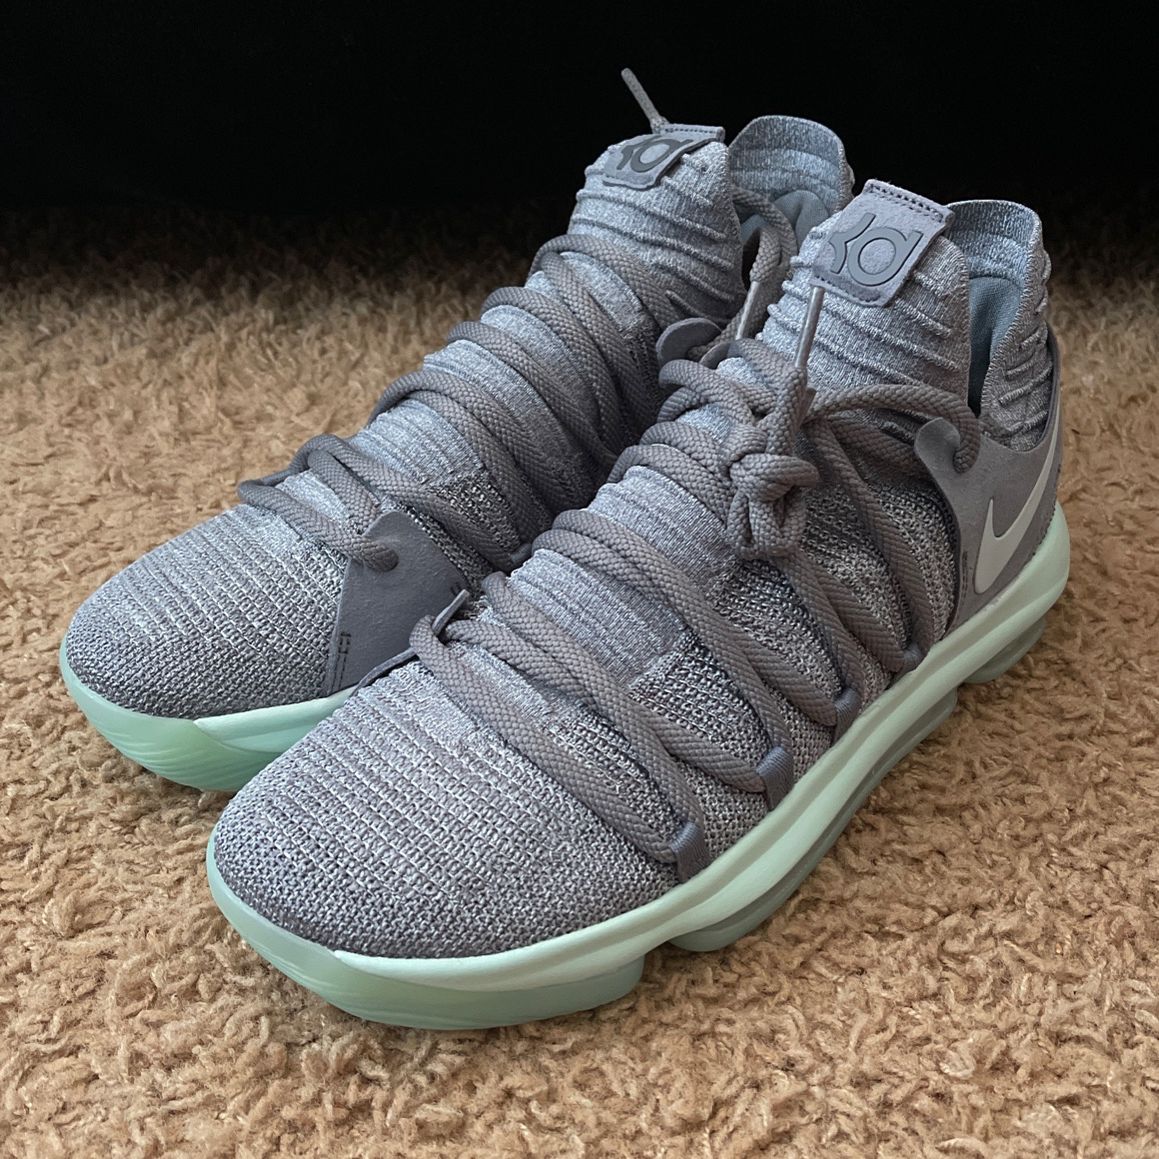 Nike KD Durant Shoes Igloo Grey Cool Size 10 for Sale in Chino Hills, CA - OfferUp